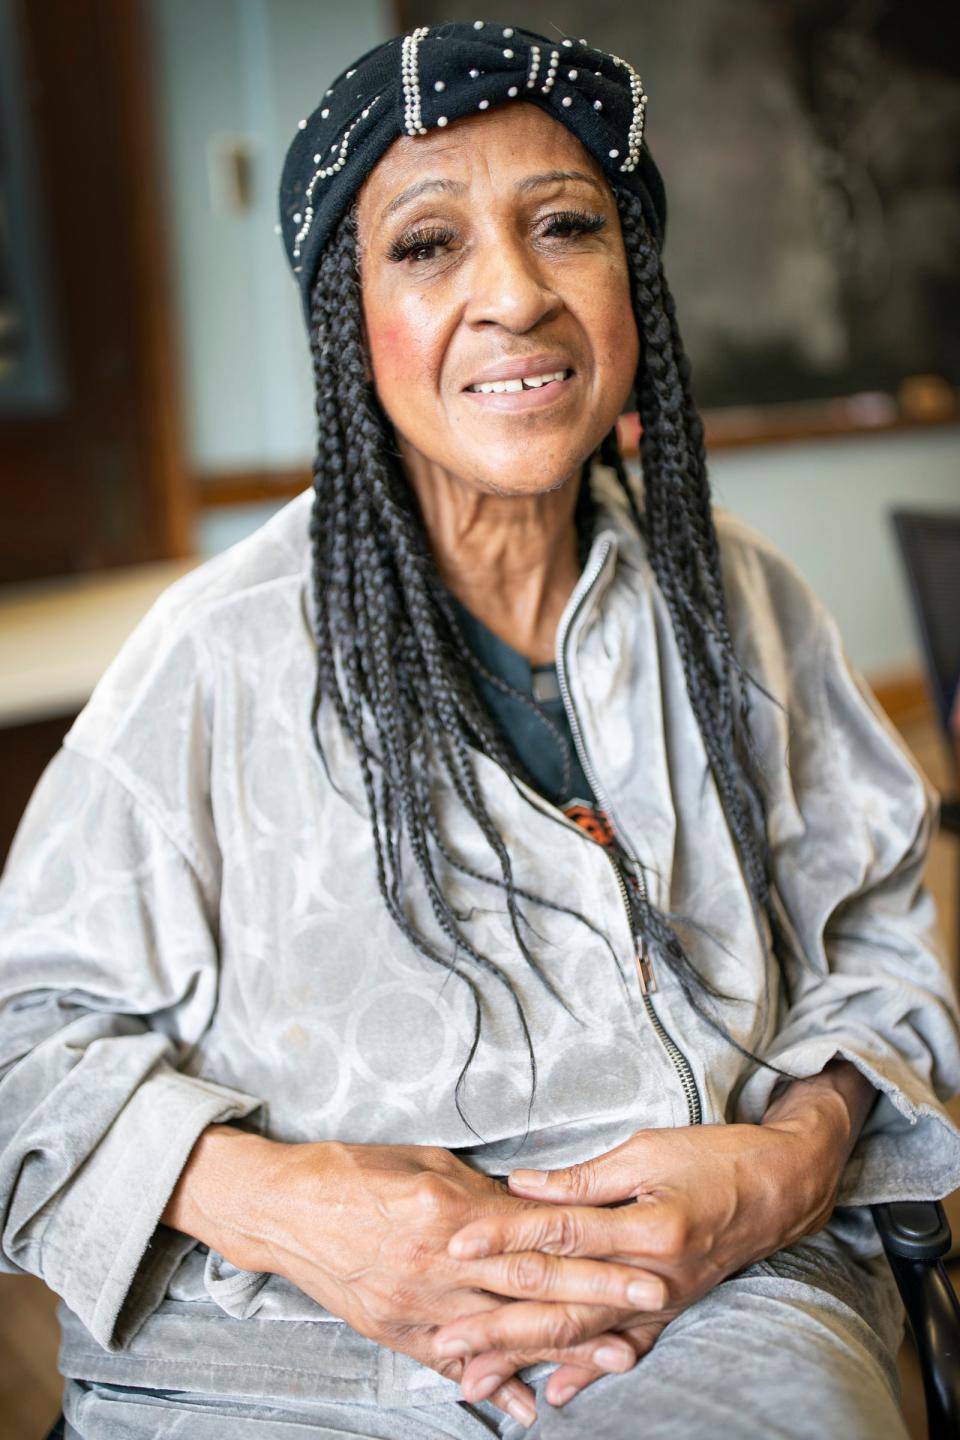 Dr. Helen J. Powell, who said she was way past 50 years old from Detroit, said her secret to a long and happy life was staying 'prayed up' and "you've got to stay active." as shared her insights during an interview at St. Patrick Senior Center Inc. in Detroit on July 26, 2023. Powell said she will soon be teaching an exercise class at St. Pats in the near future.